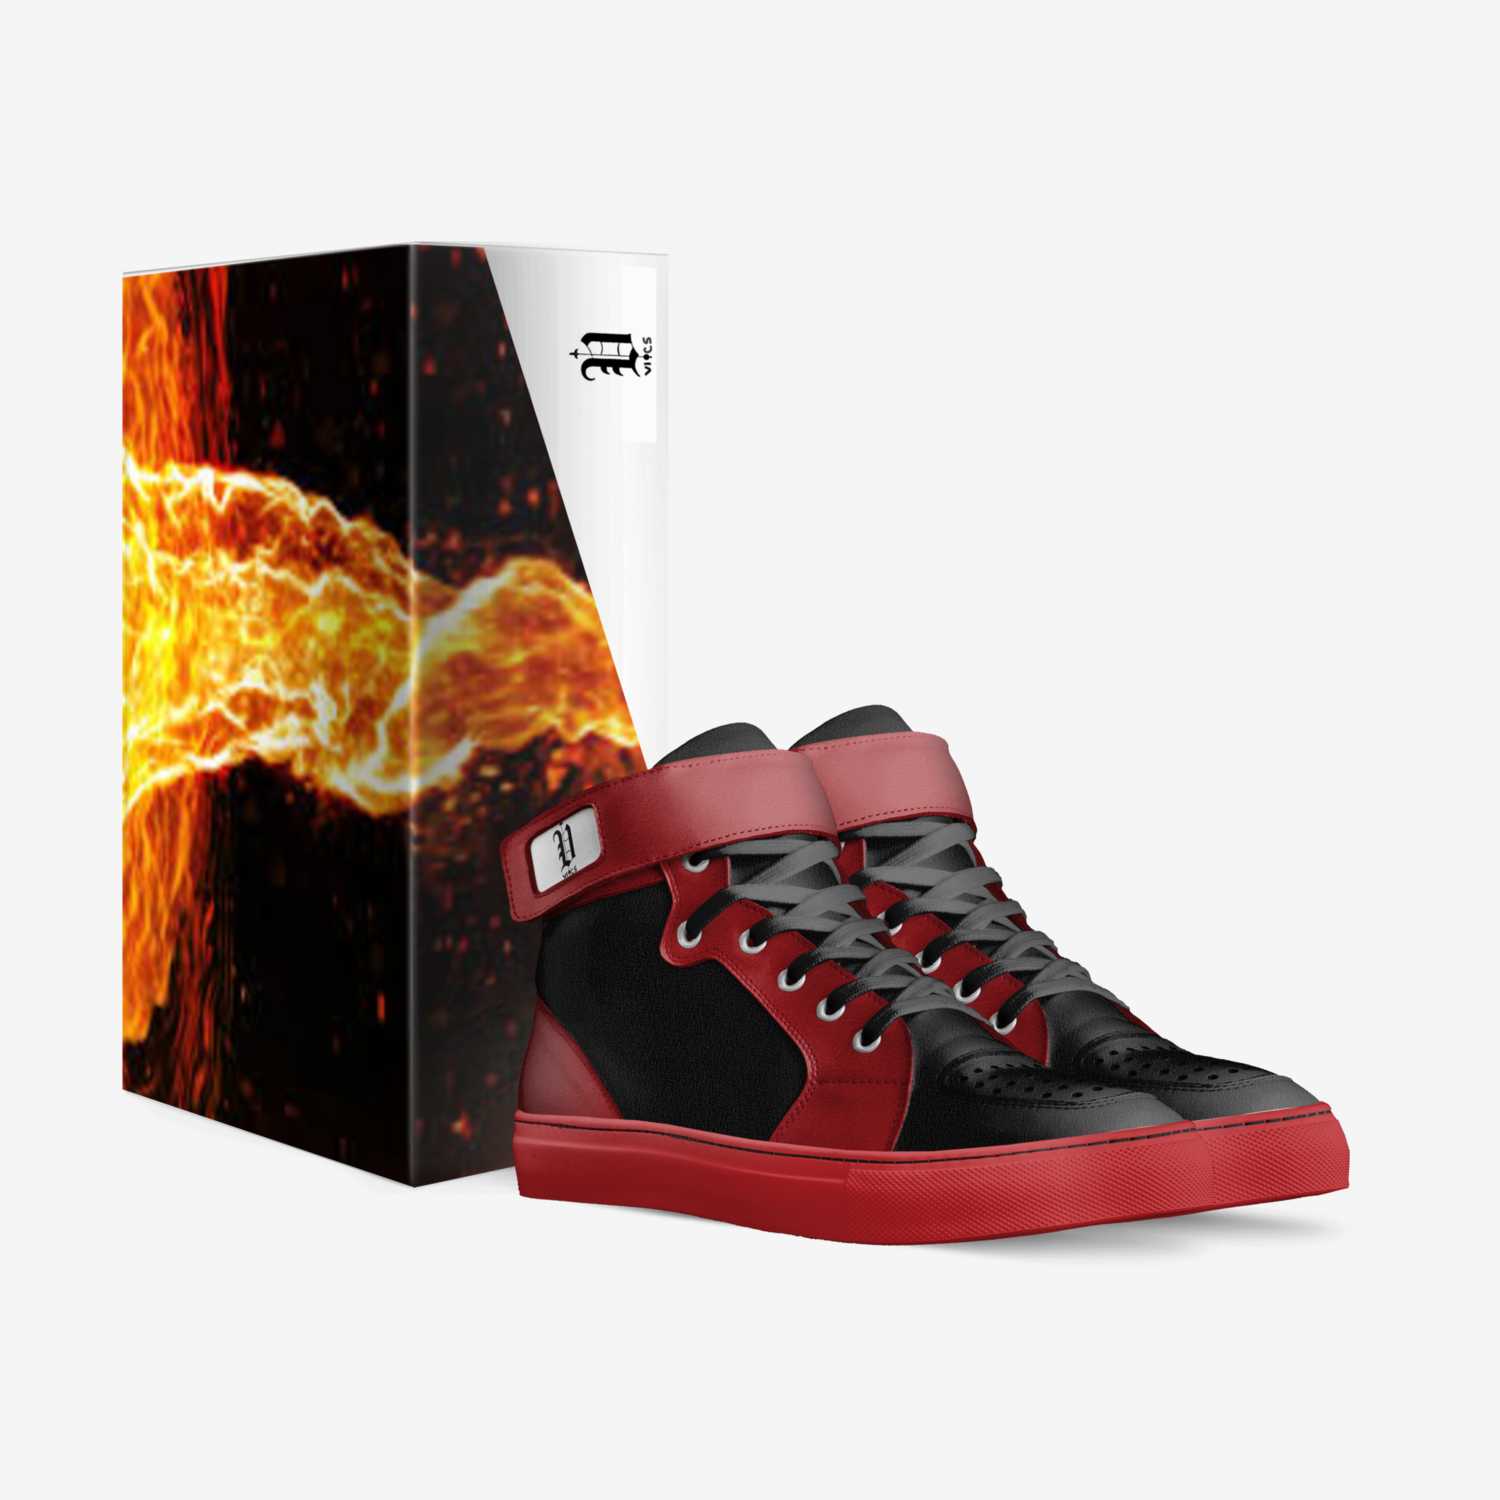 Vics tornado custom made in Italy shoes by Brayden Murphy | Box view